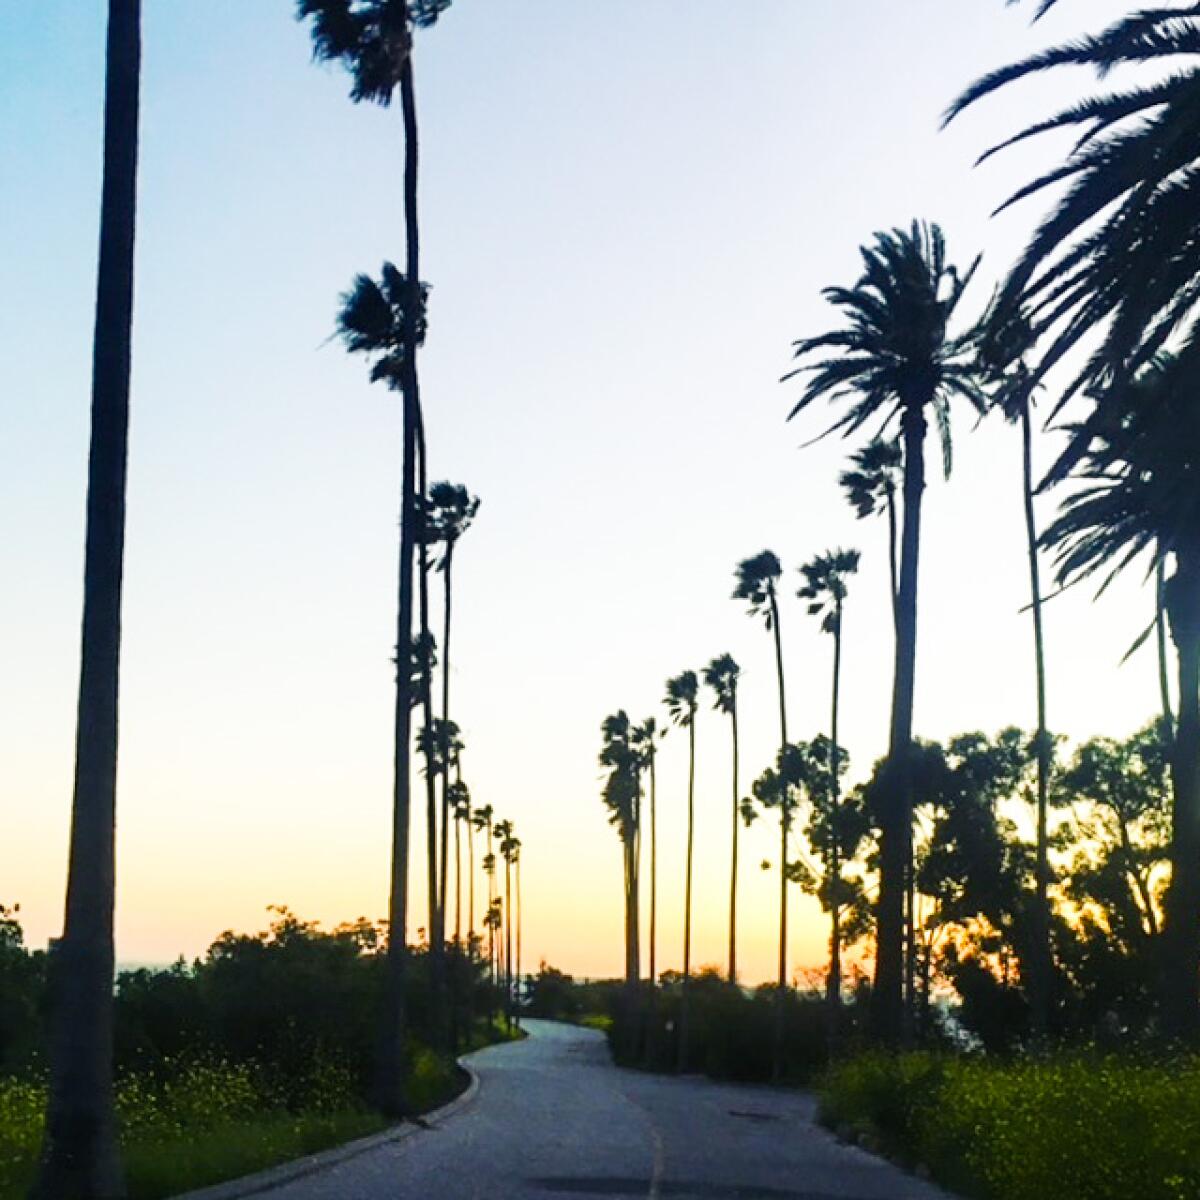 A road lined with very tall palm trees leading toward the sunset